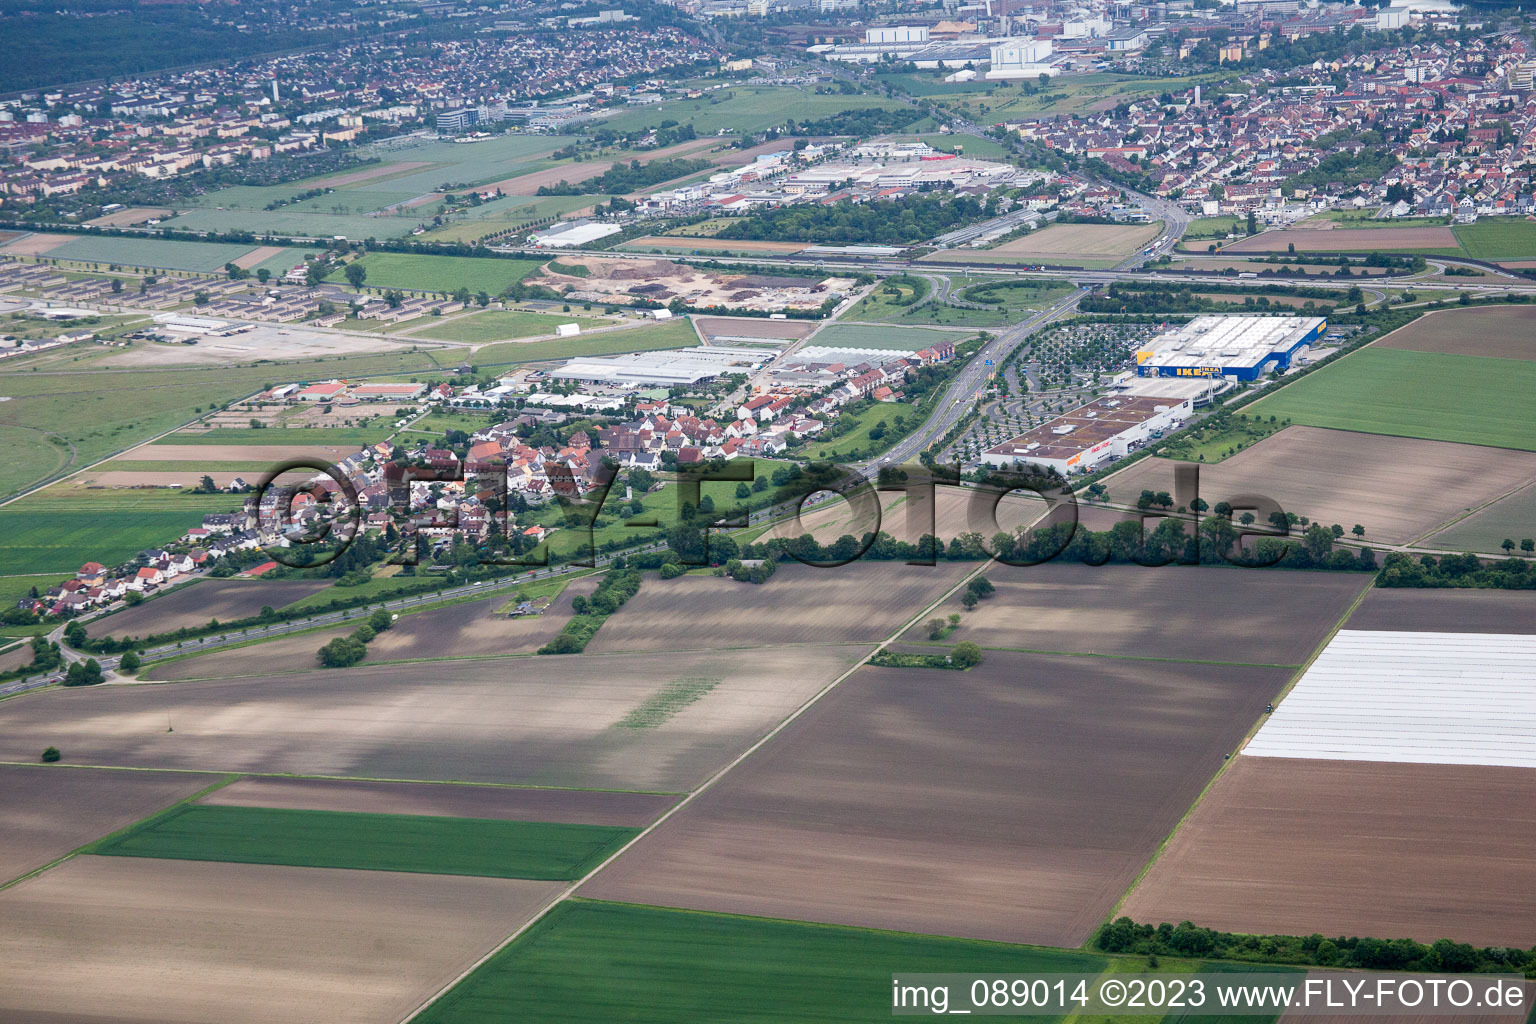 Scharhof, IKEA in the district Sandhofen in Mannheim in the state Baden-Wuerttemberg, Germany from above